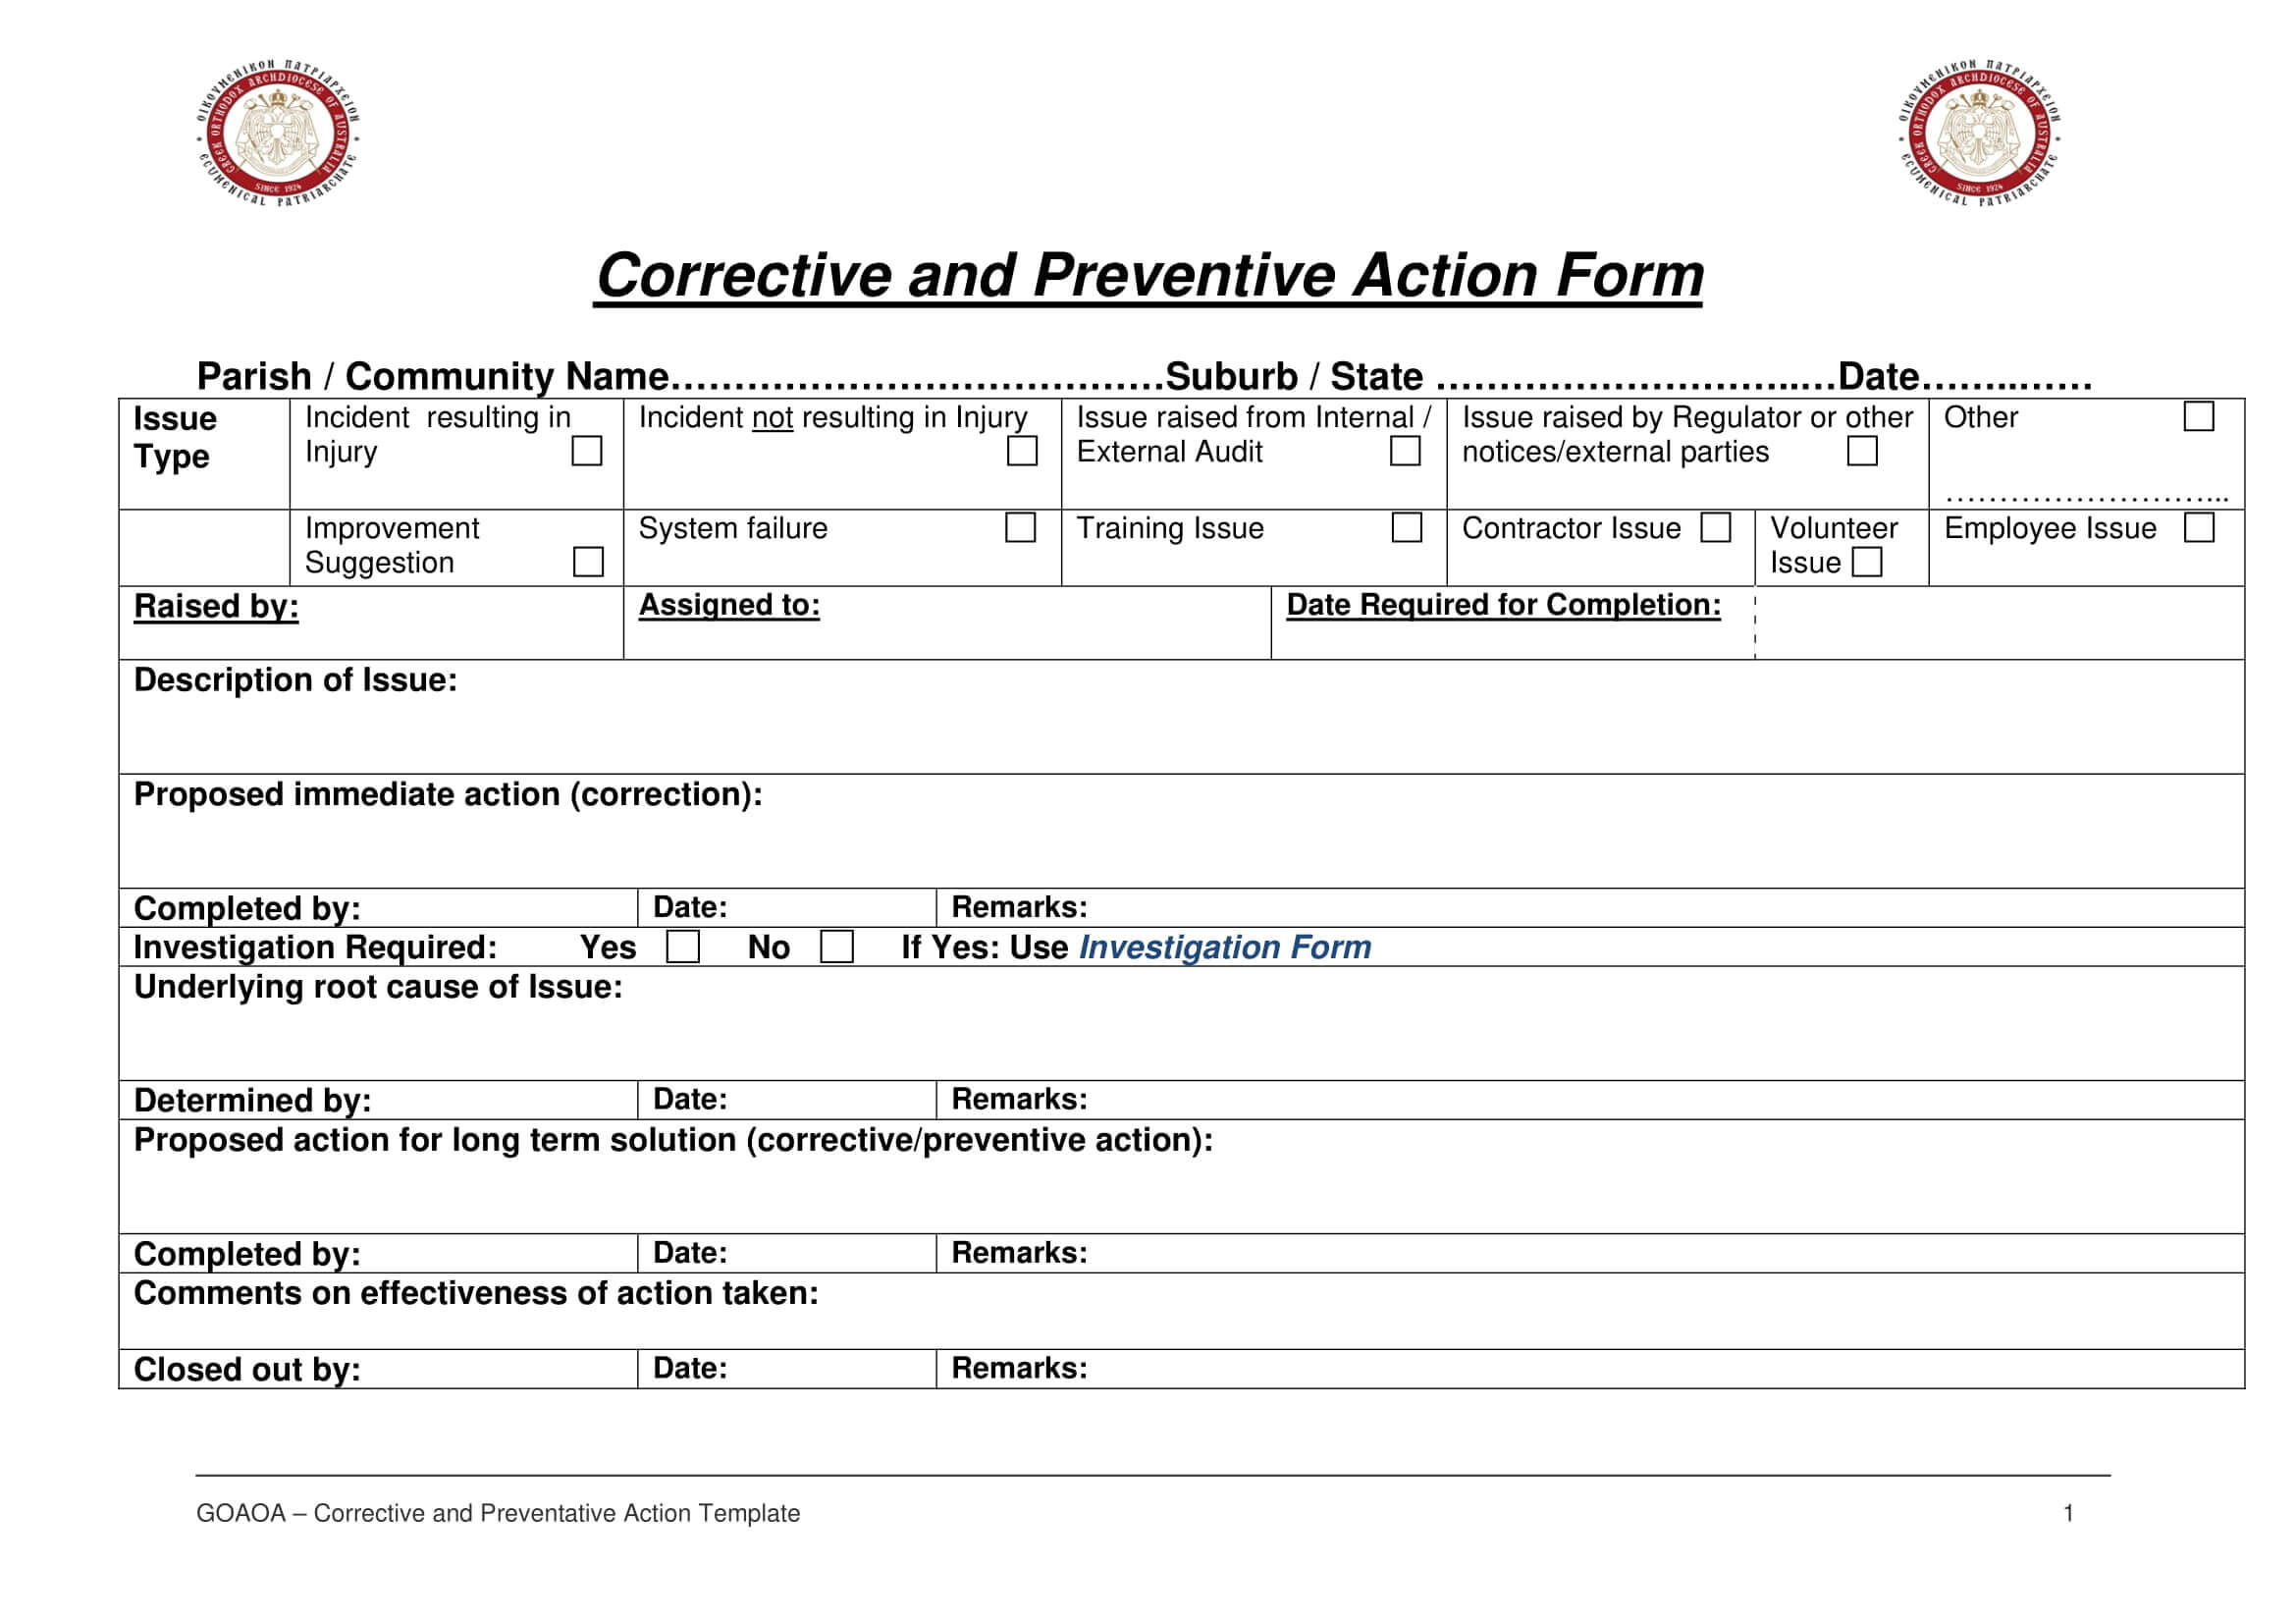 009 Corrective And Preventive Action Report Form Example With 8D Report